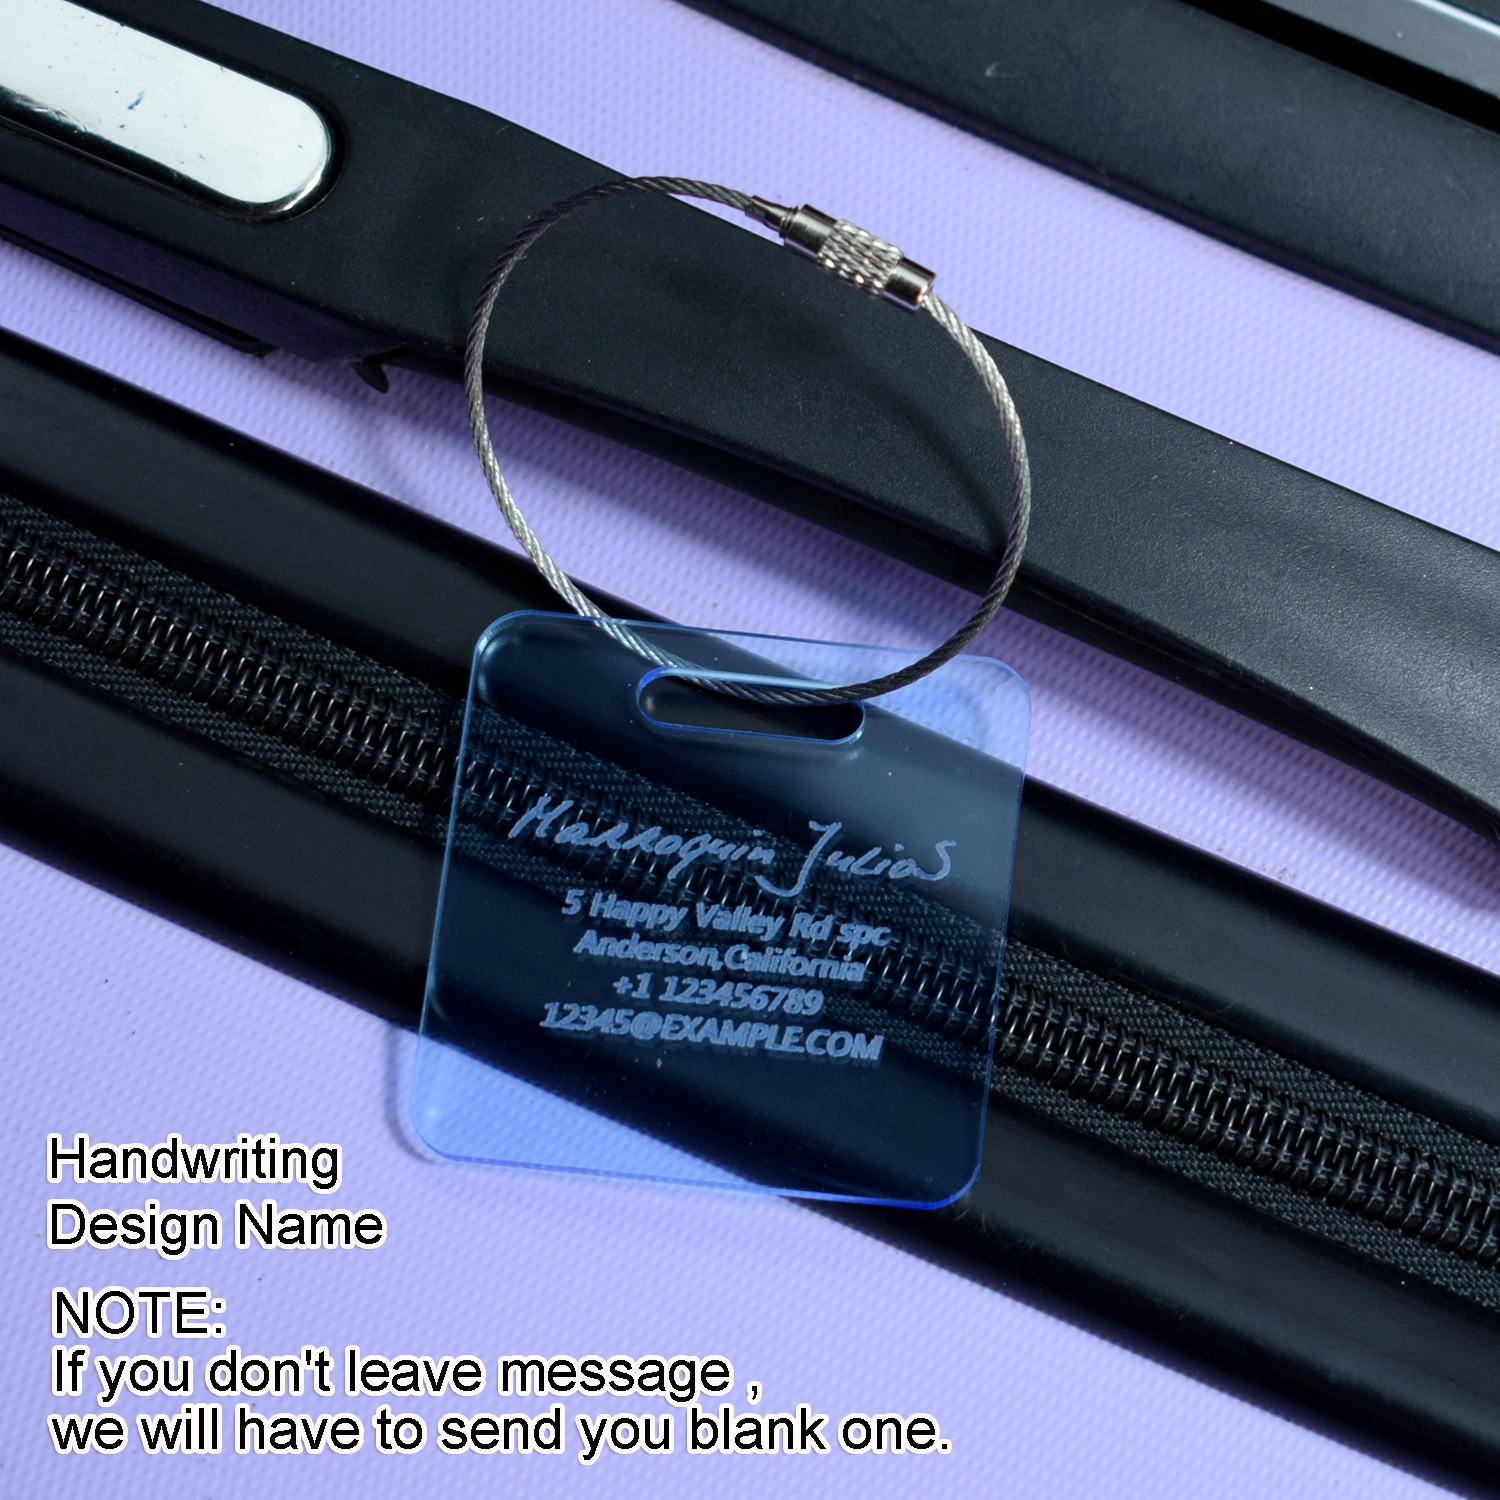 Clips for Luggage Tags / Bags